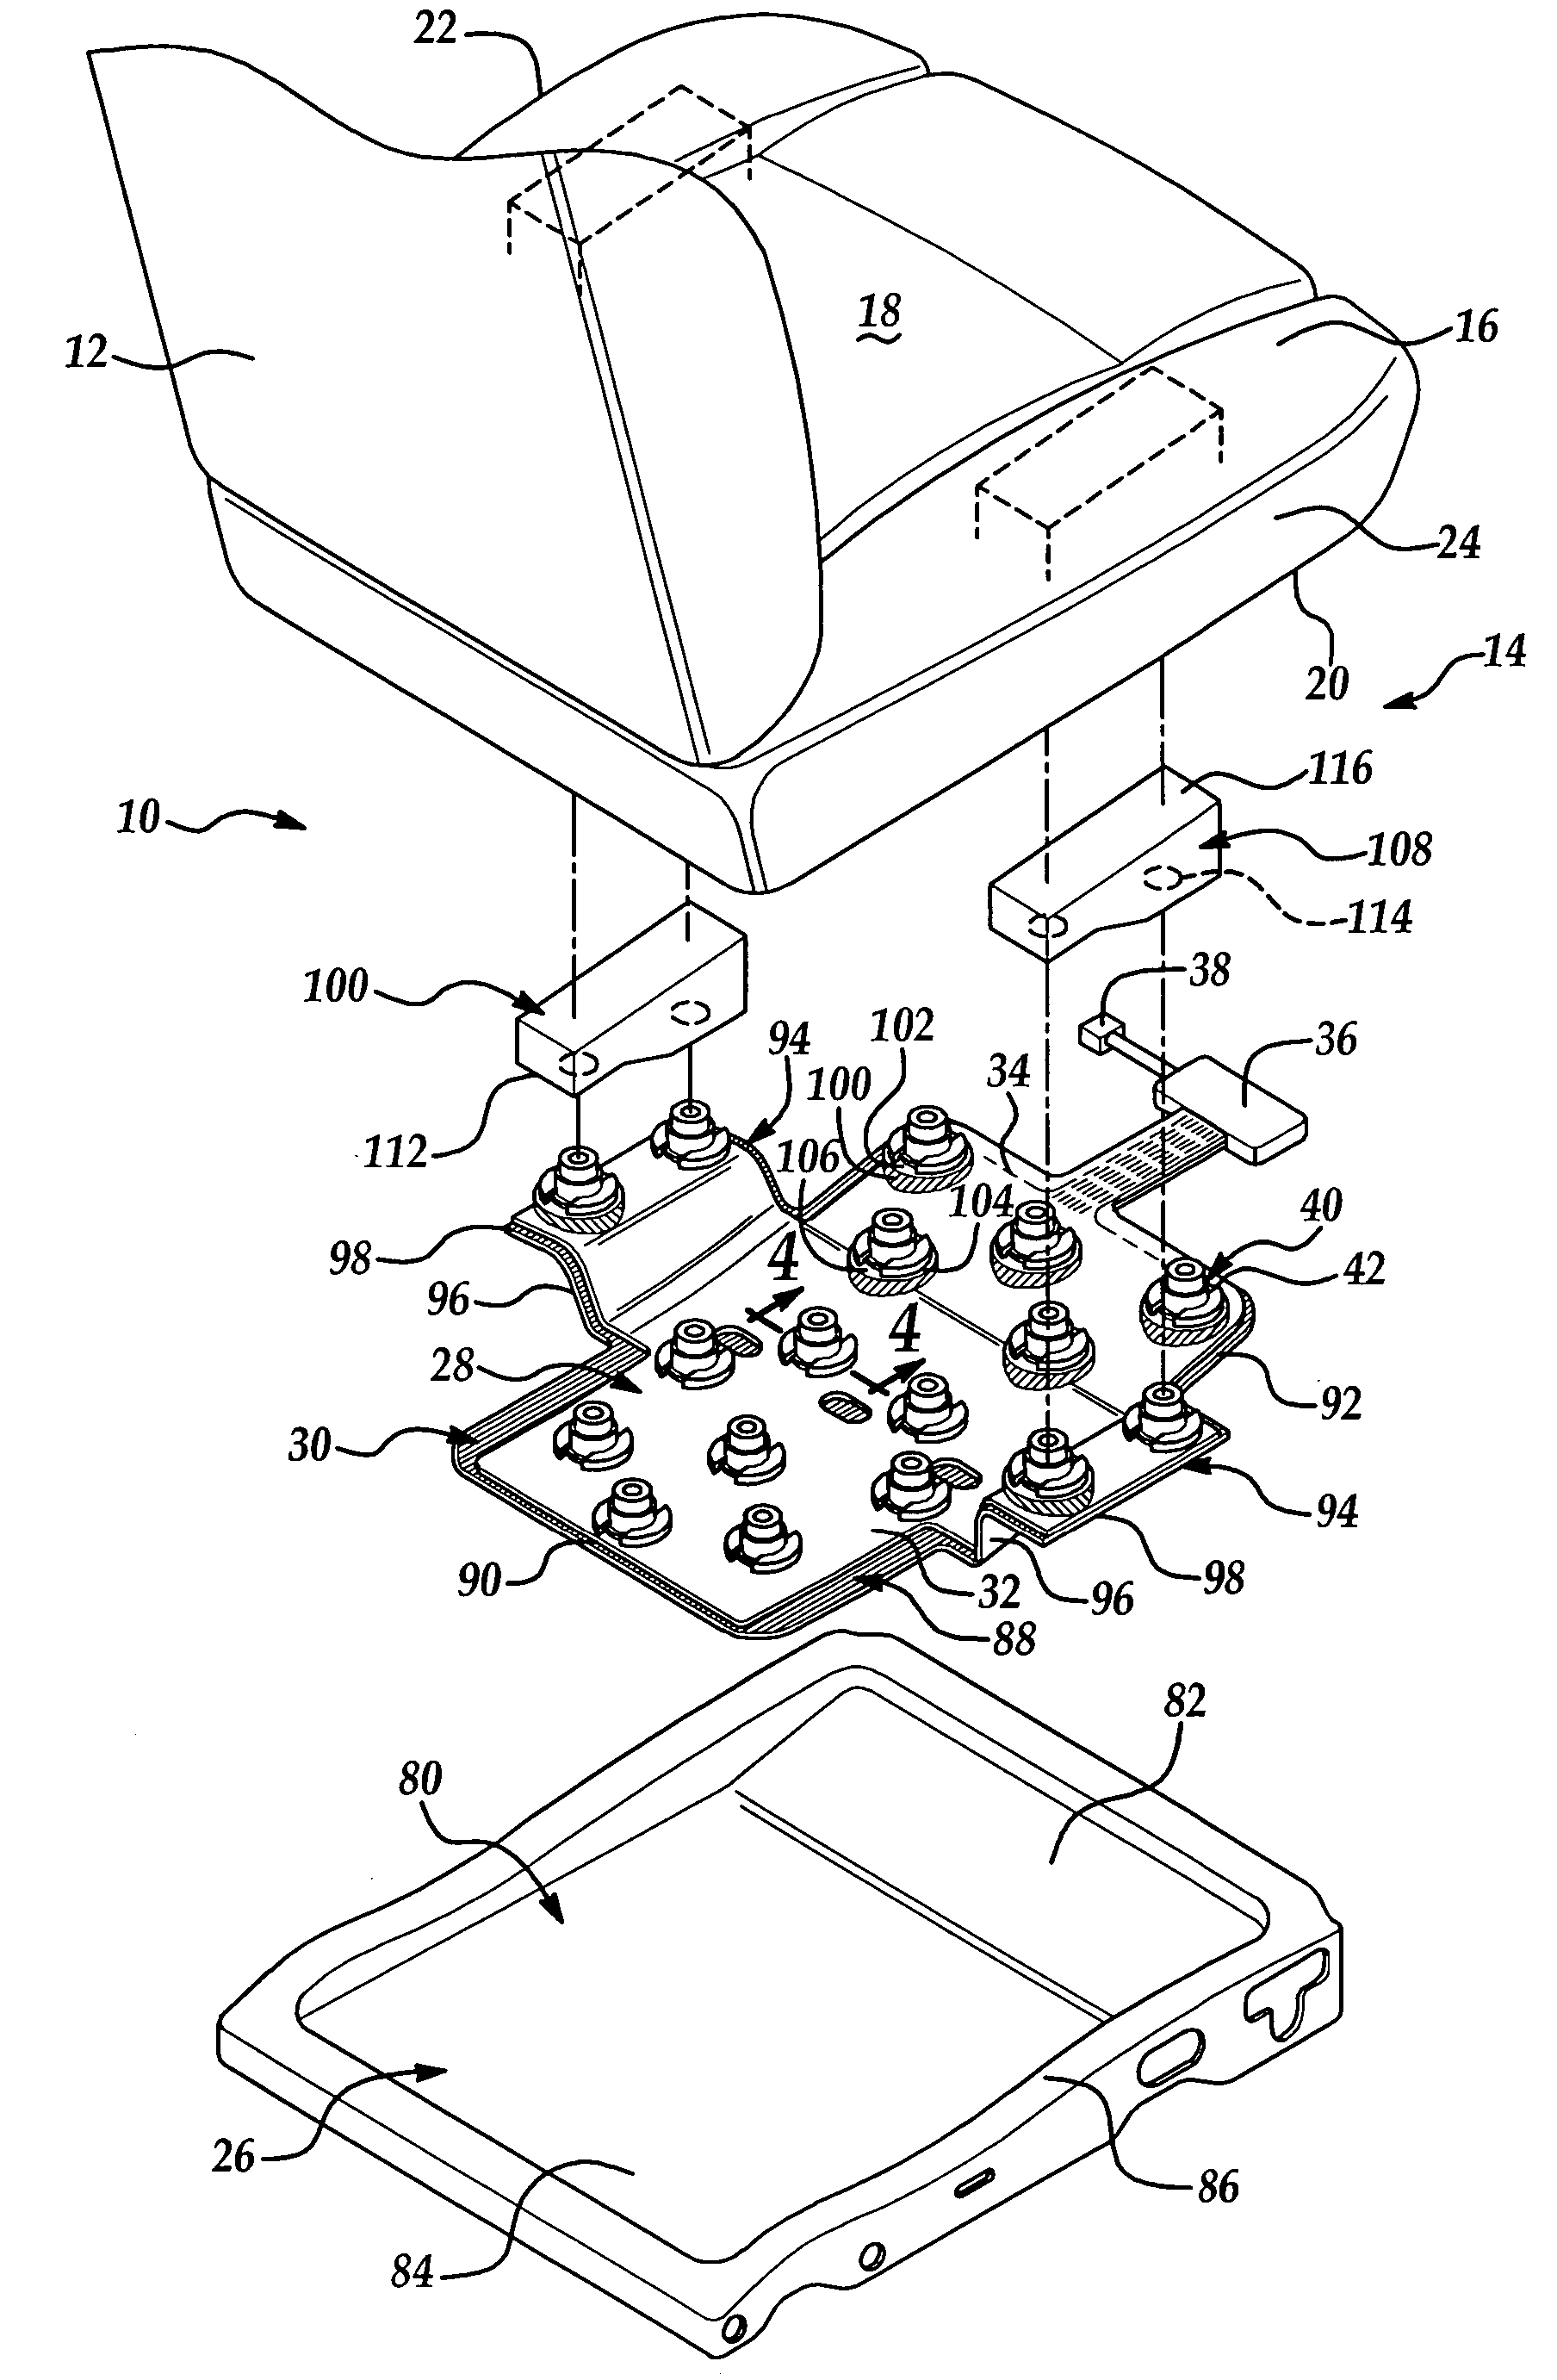 Vehicle seat assembly having a vehicle occupant sensing system and a seat cushion insert positioned therein